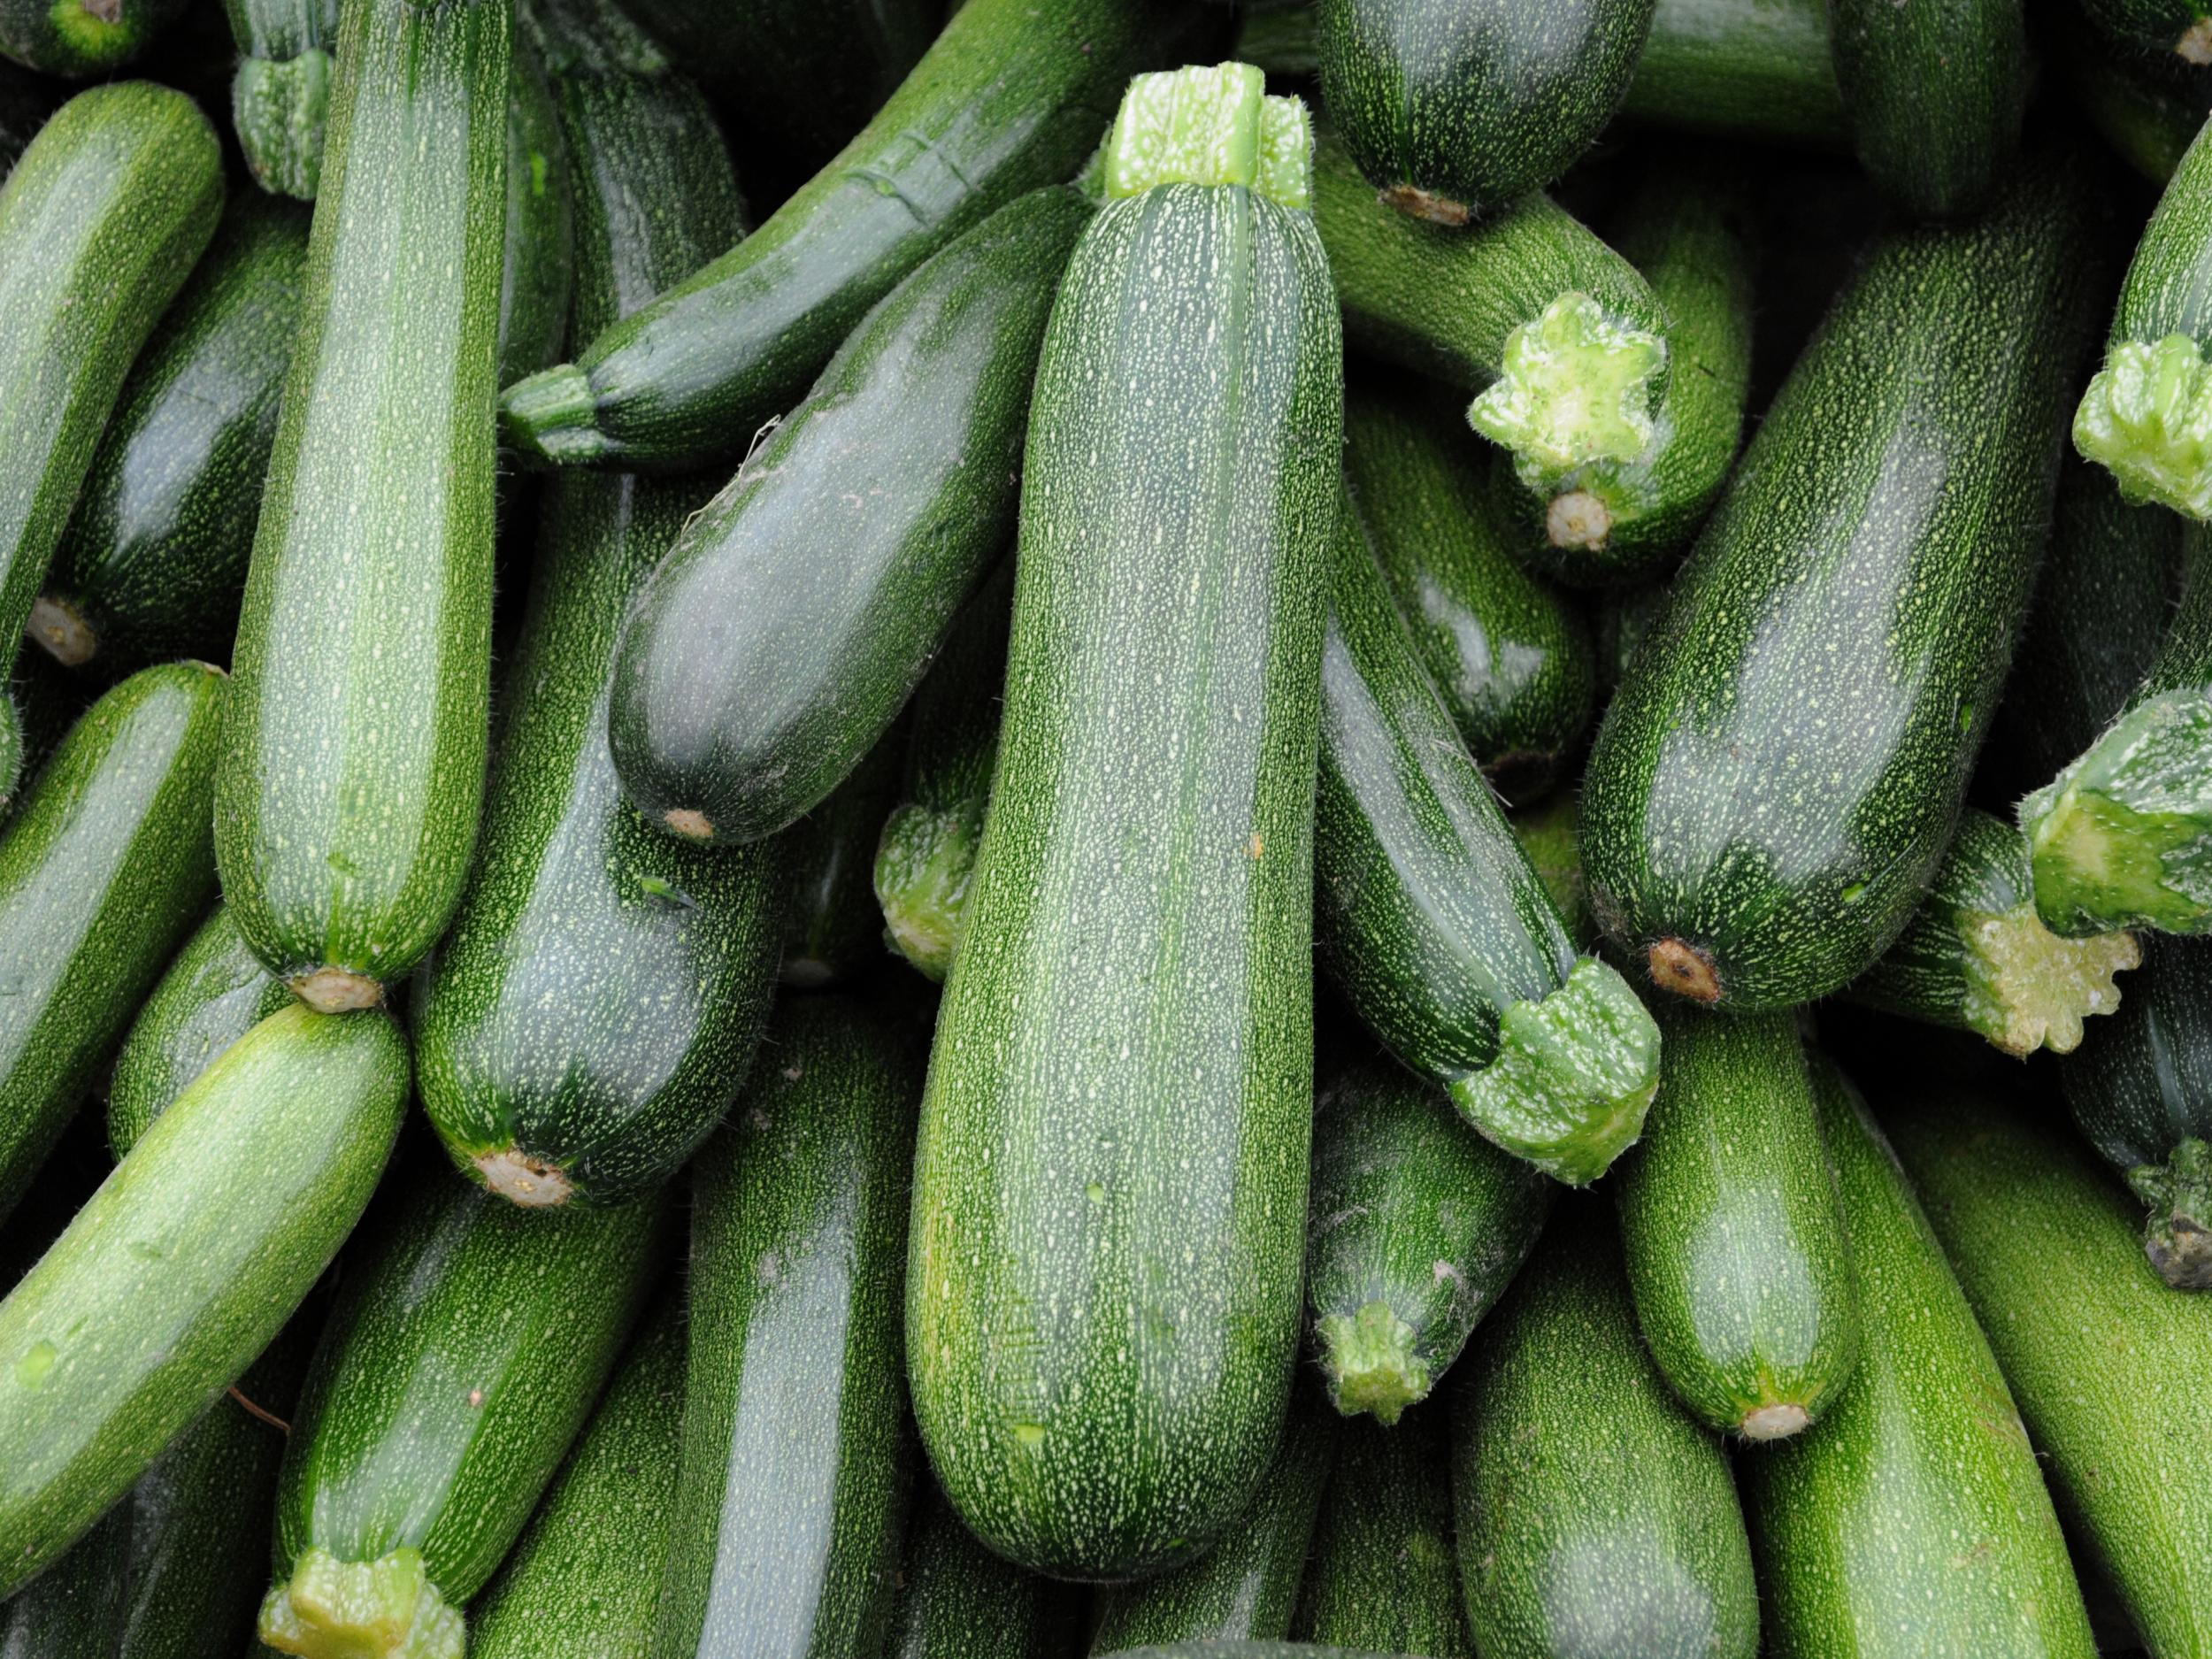 Courgette deficit: UK gripped by vegetable shortage after cold ... - The Independent (registration)